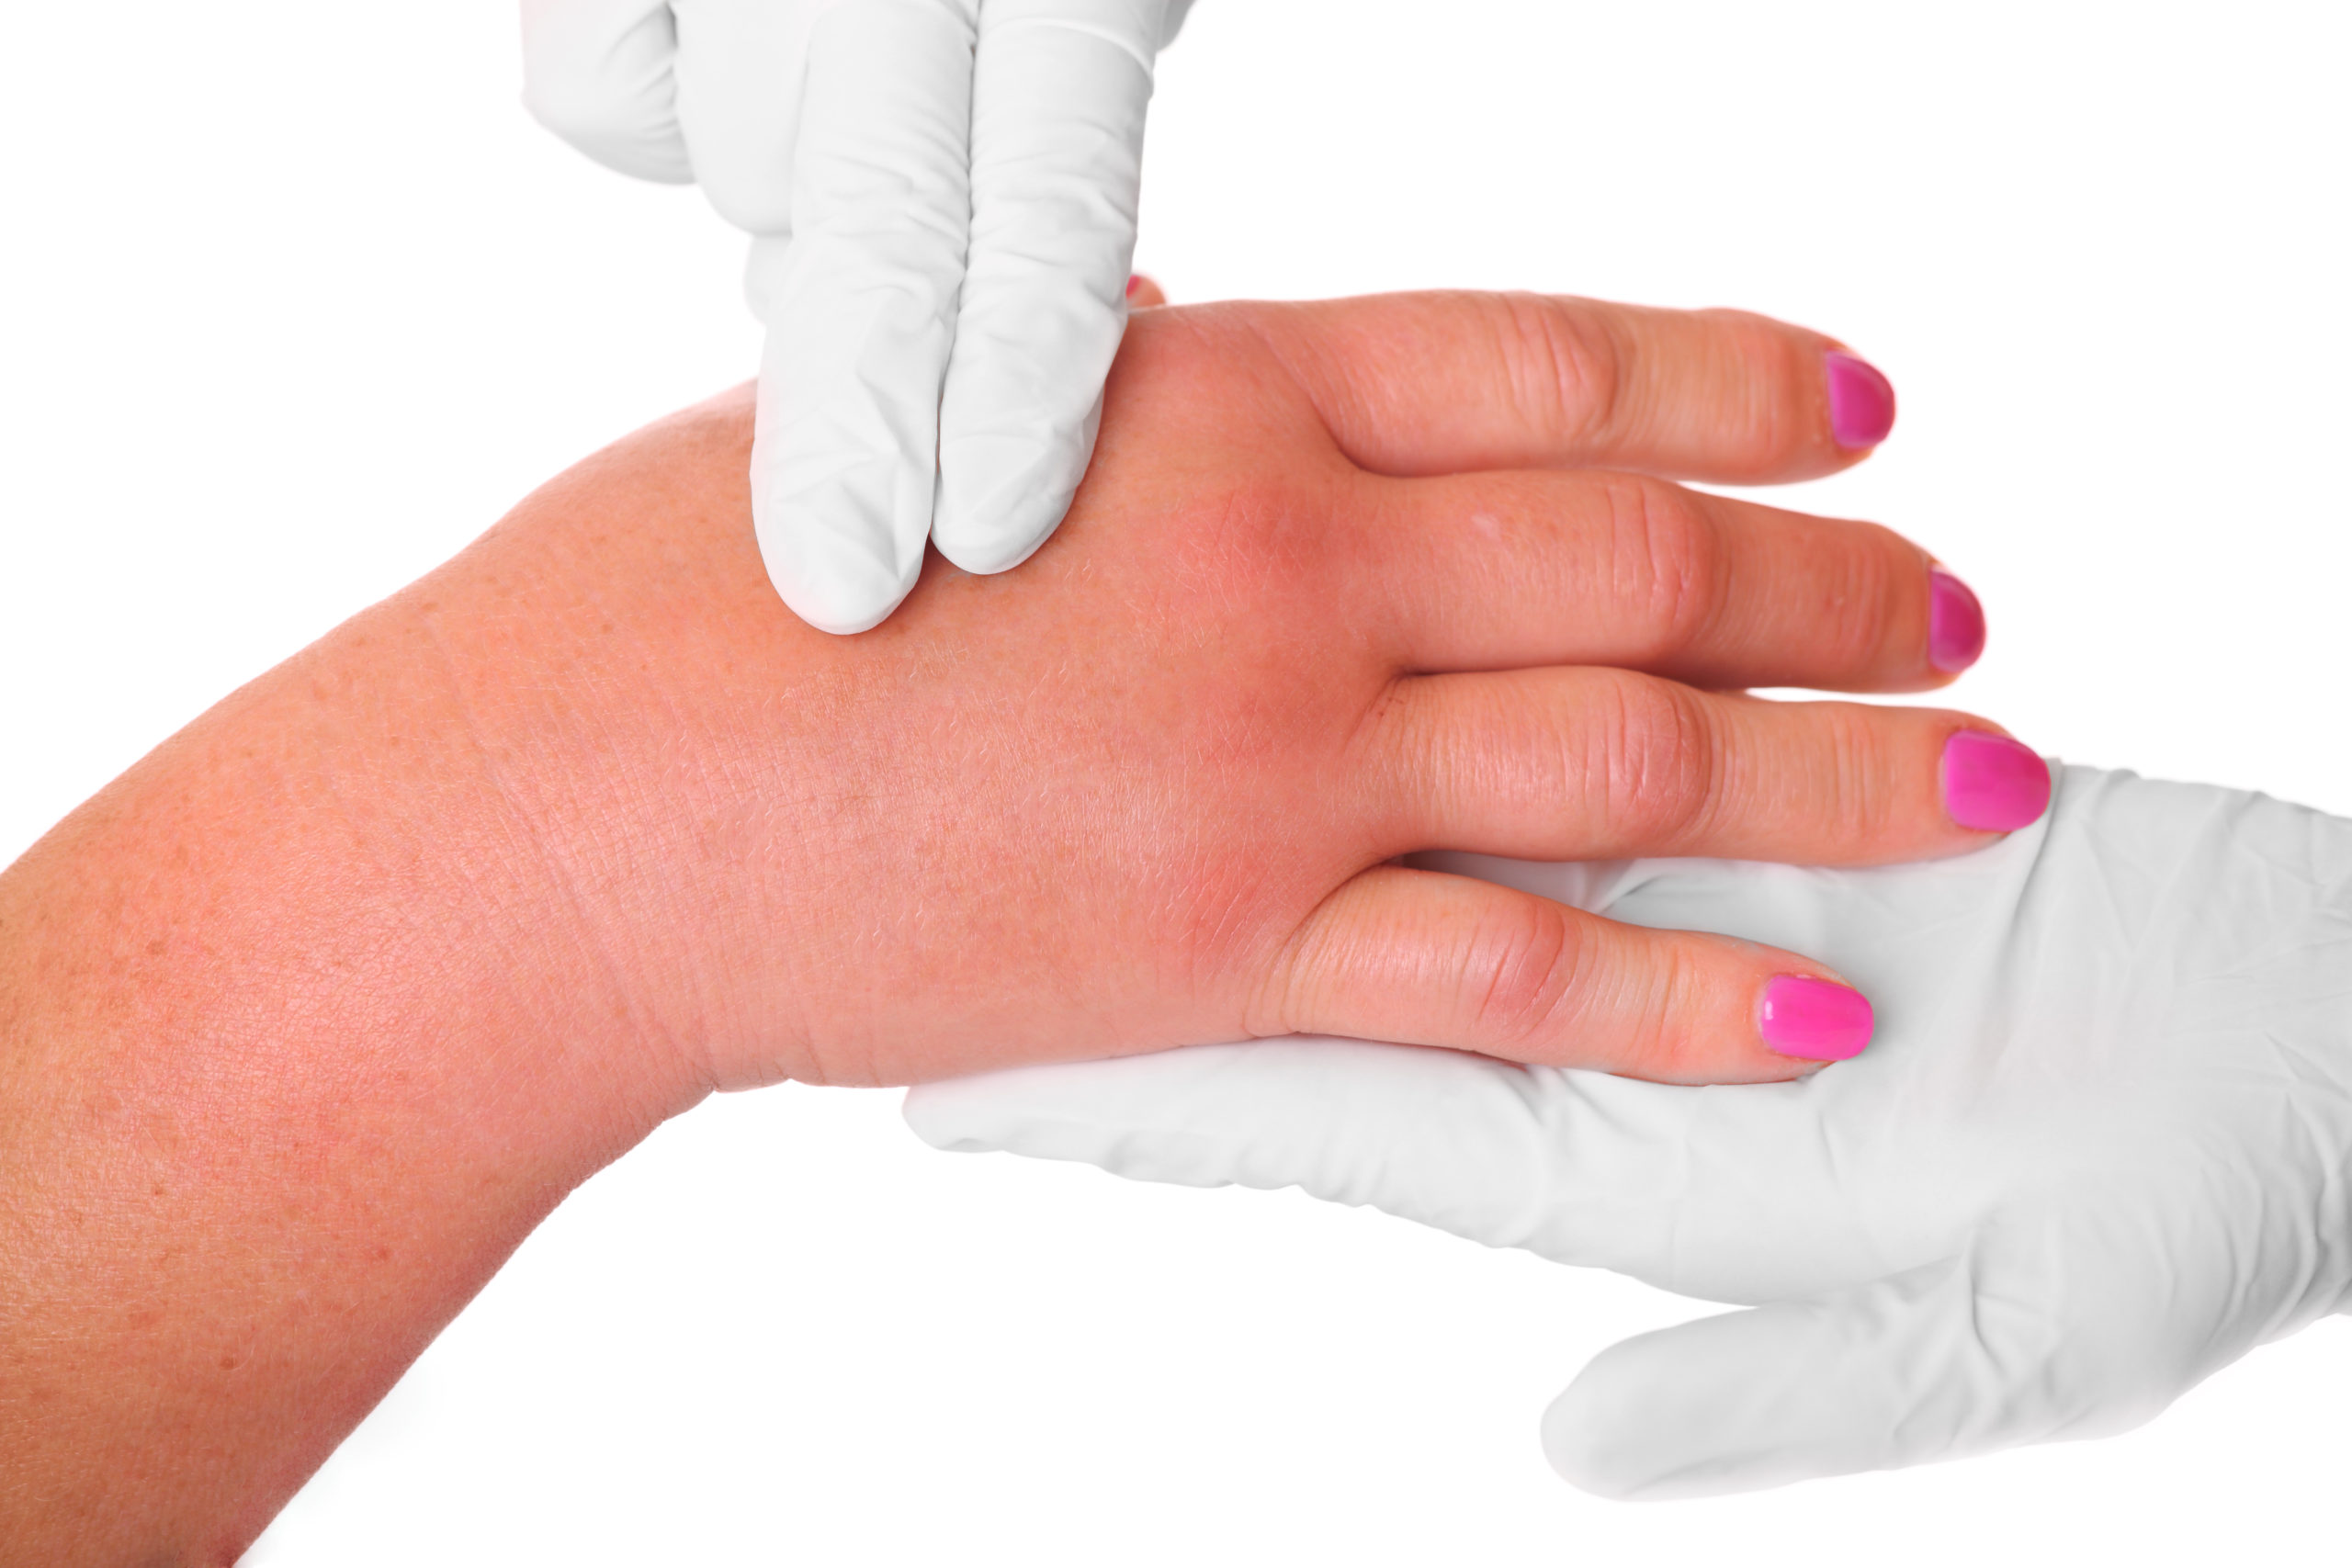 Image of a swollen hand being palpated by someone in white gloves